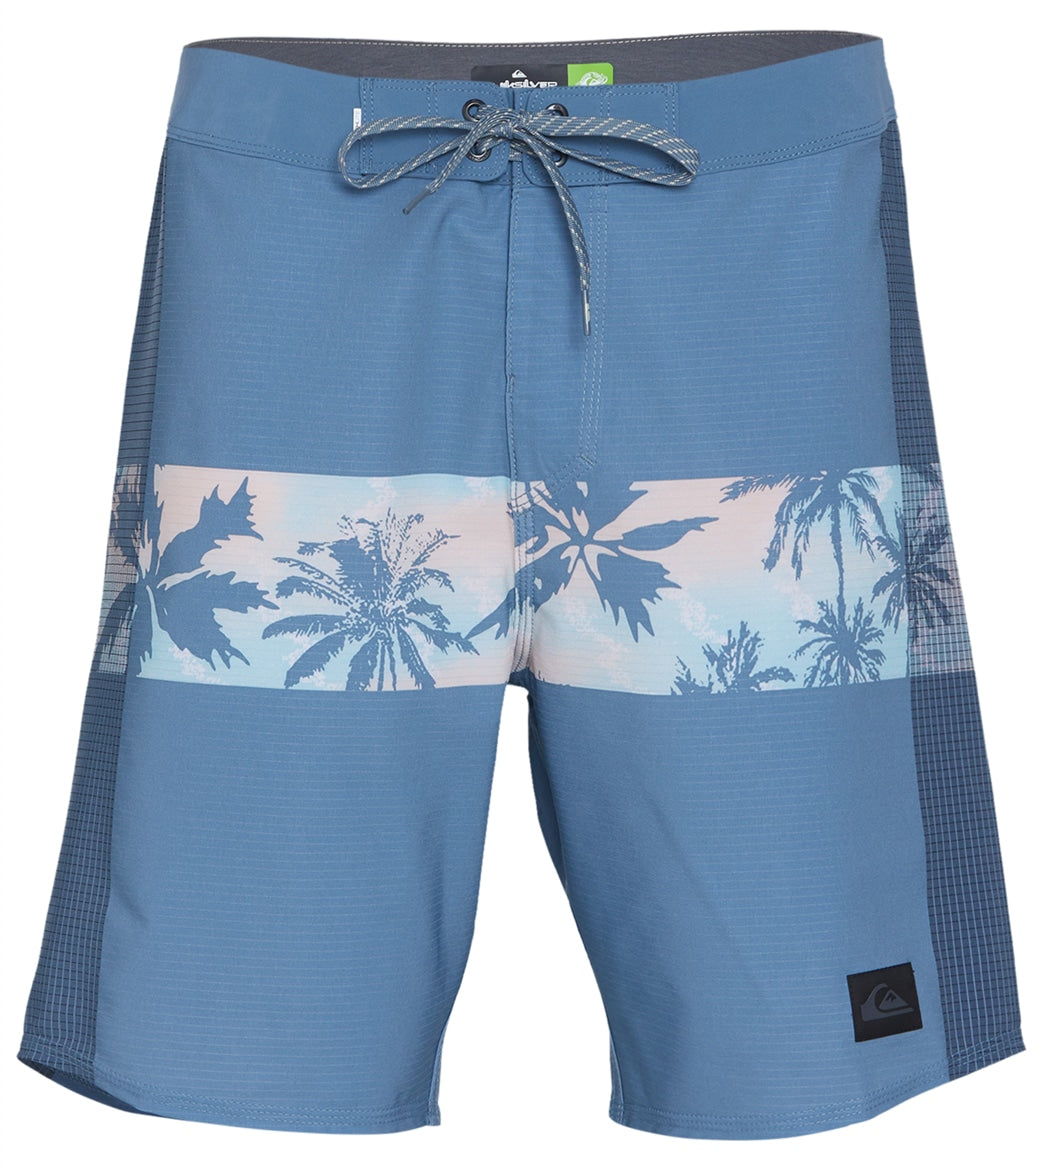 Quiksilver Mens 19 Highlite Arch Board Shorts